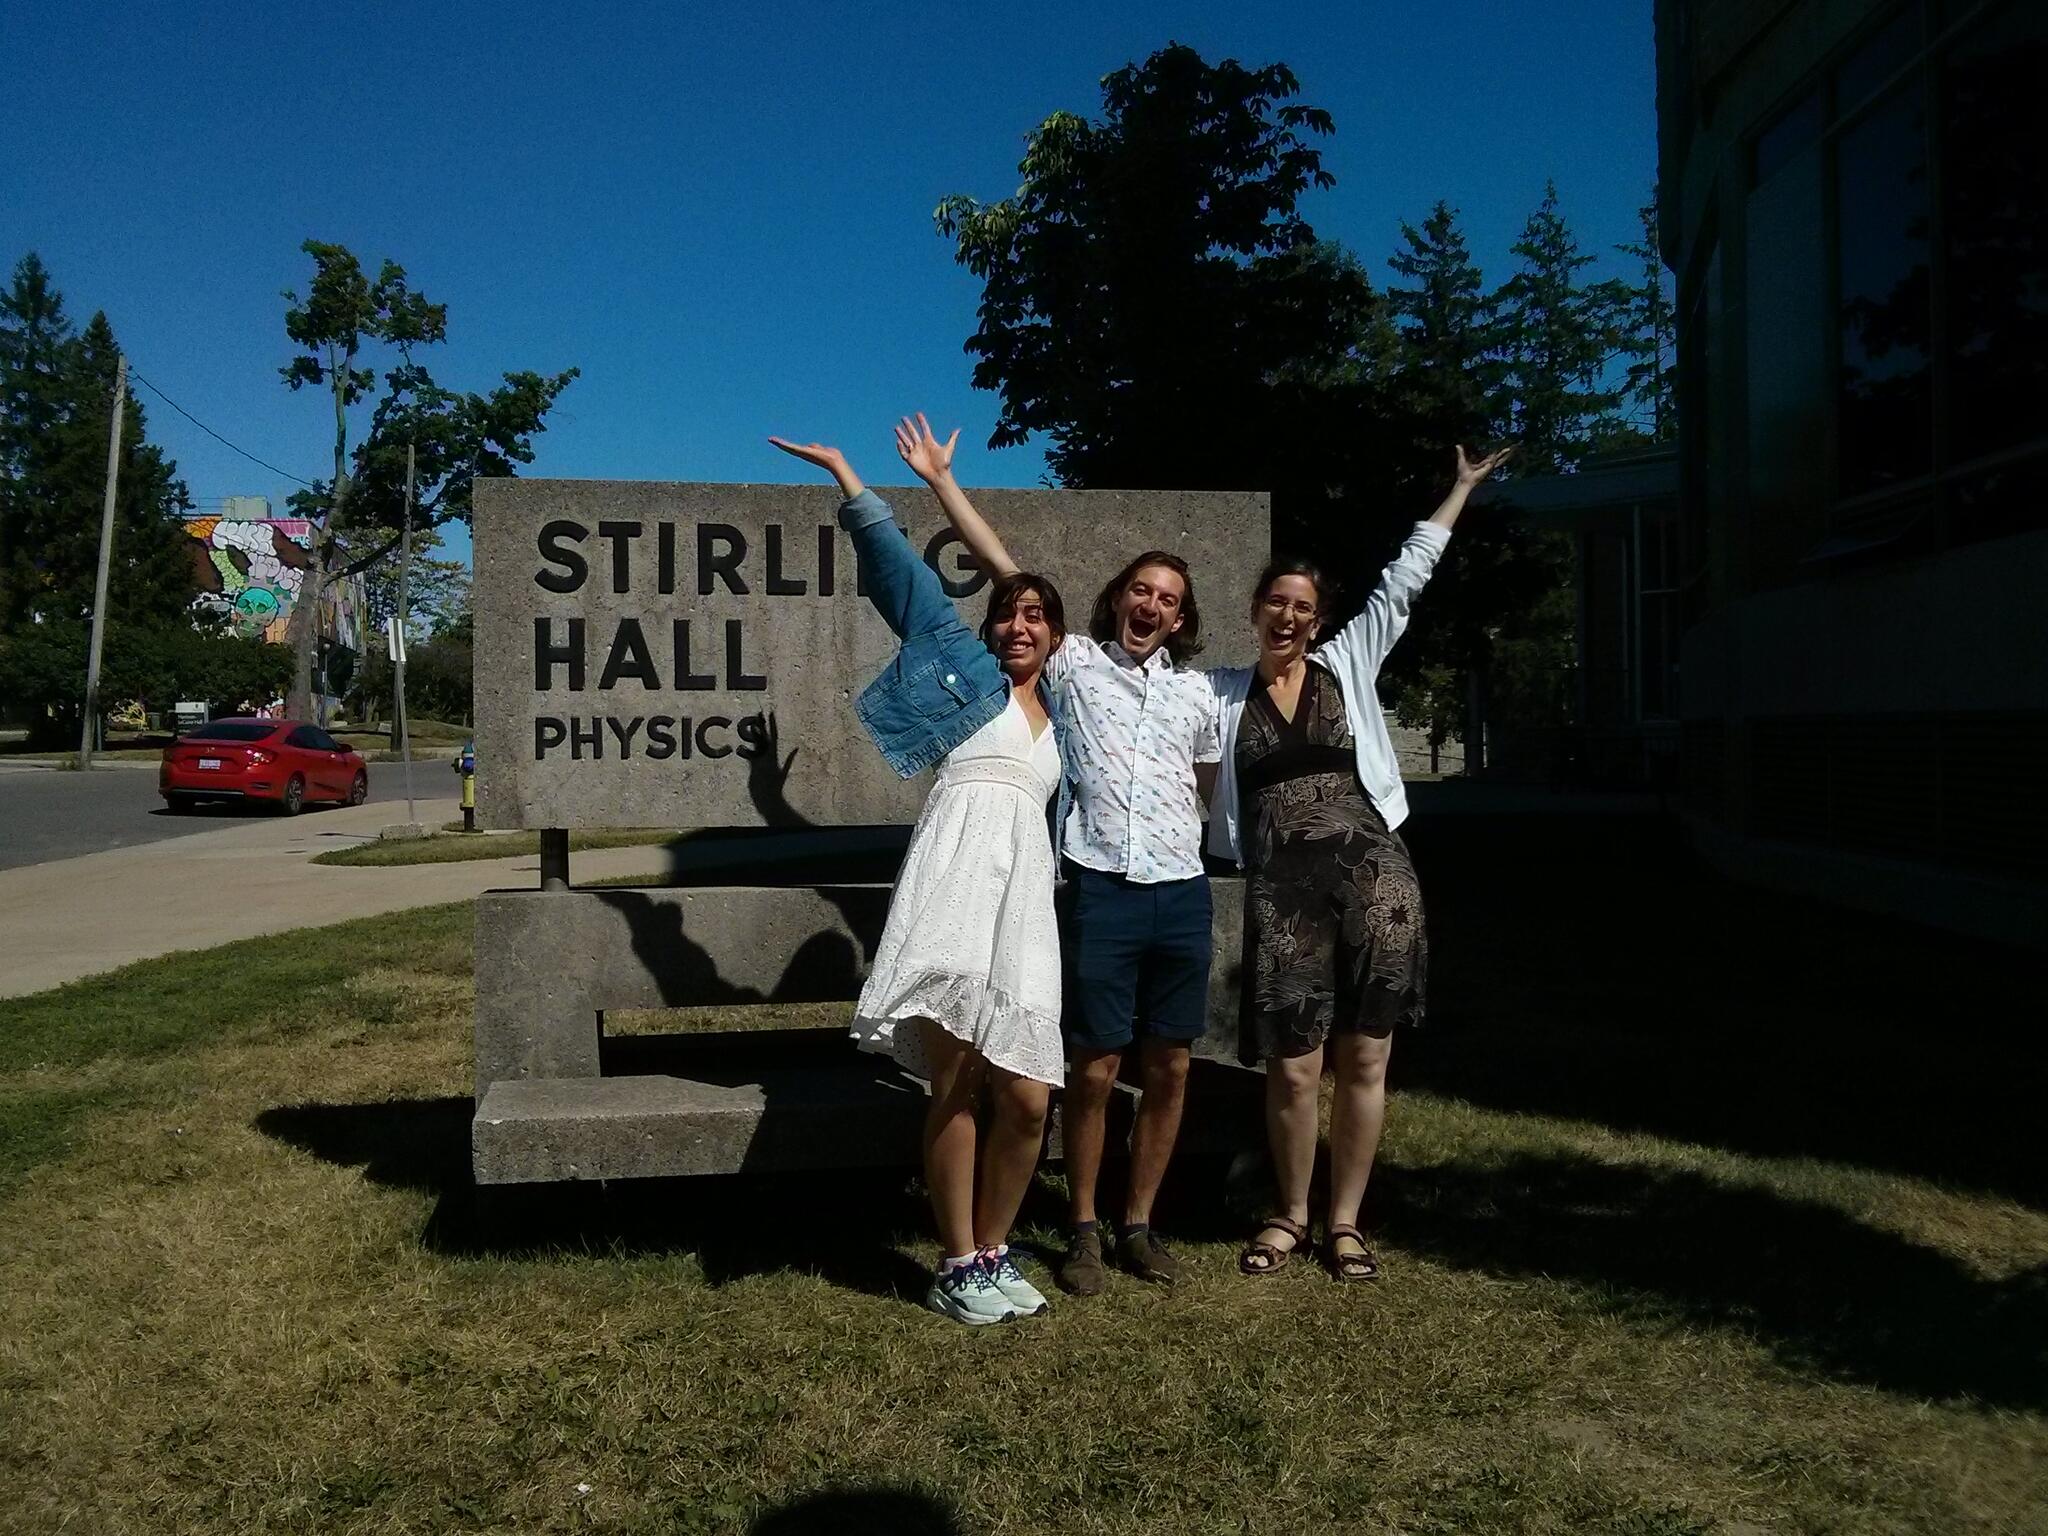 Students Parisa and Arnaud with Prof Sadavoy in front of the Stirling Hall Physics sign